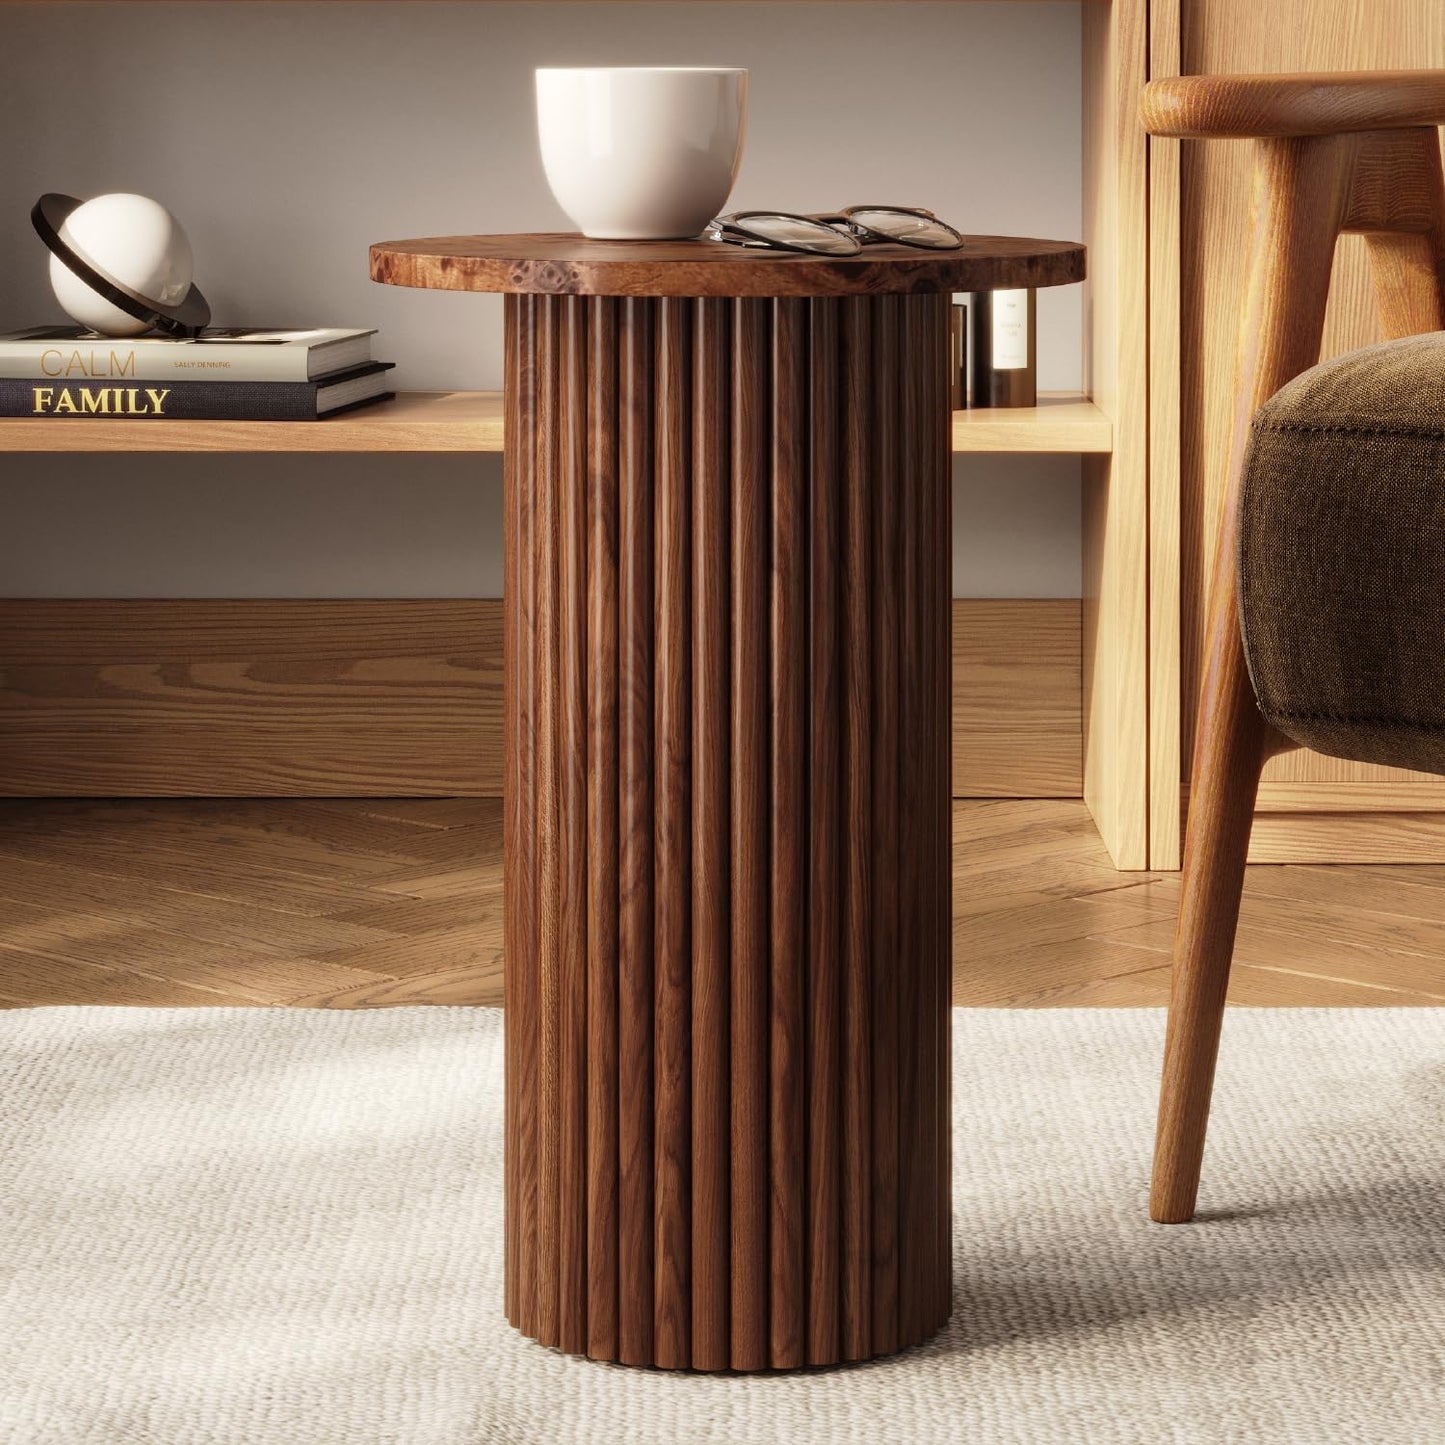 Round Fluted Accent Side Table - Small Drink Table - Living Room Furniture - Modern Home and Bedroom Decor - Pedestal Side Table with a Solid Oak